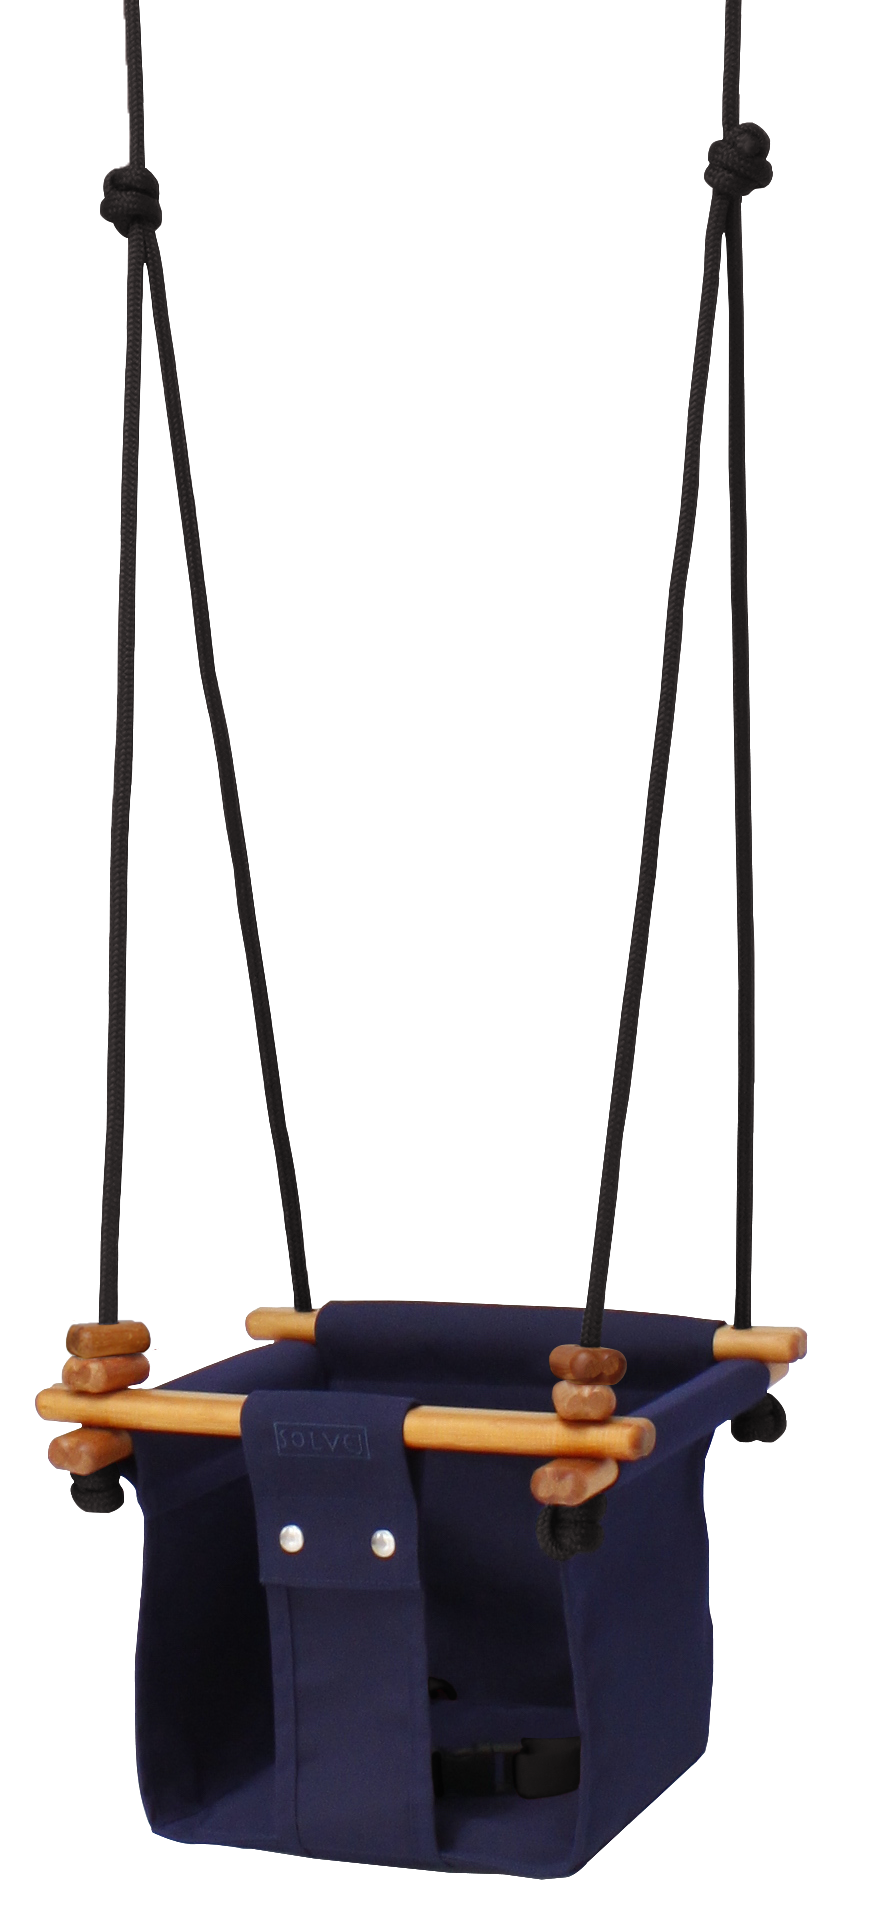 Solvej Baby and Toddler Canvas Swing, Midnight Blue